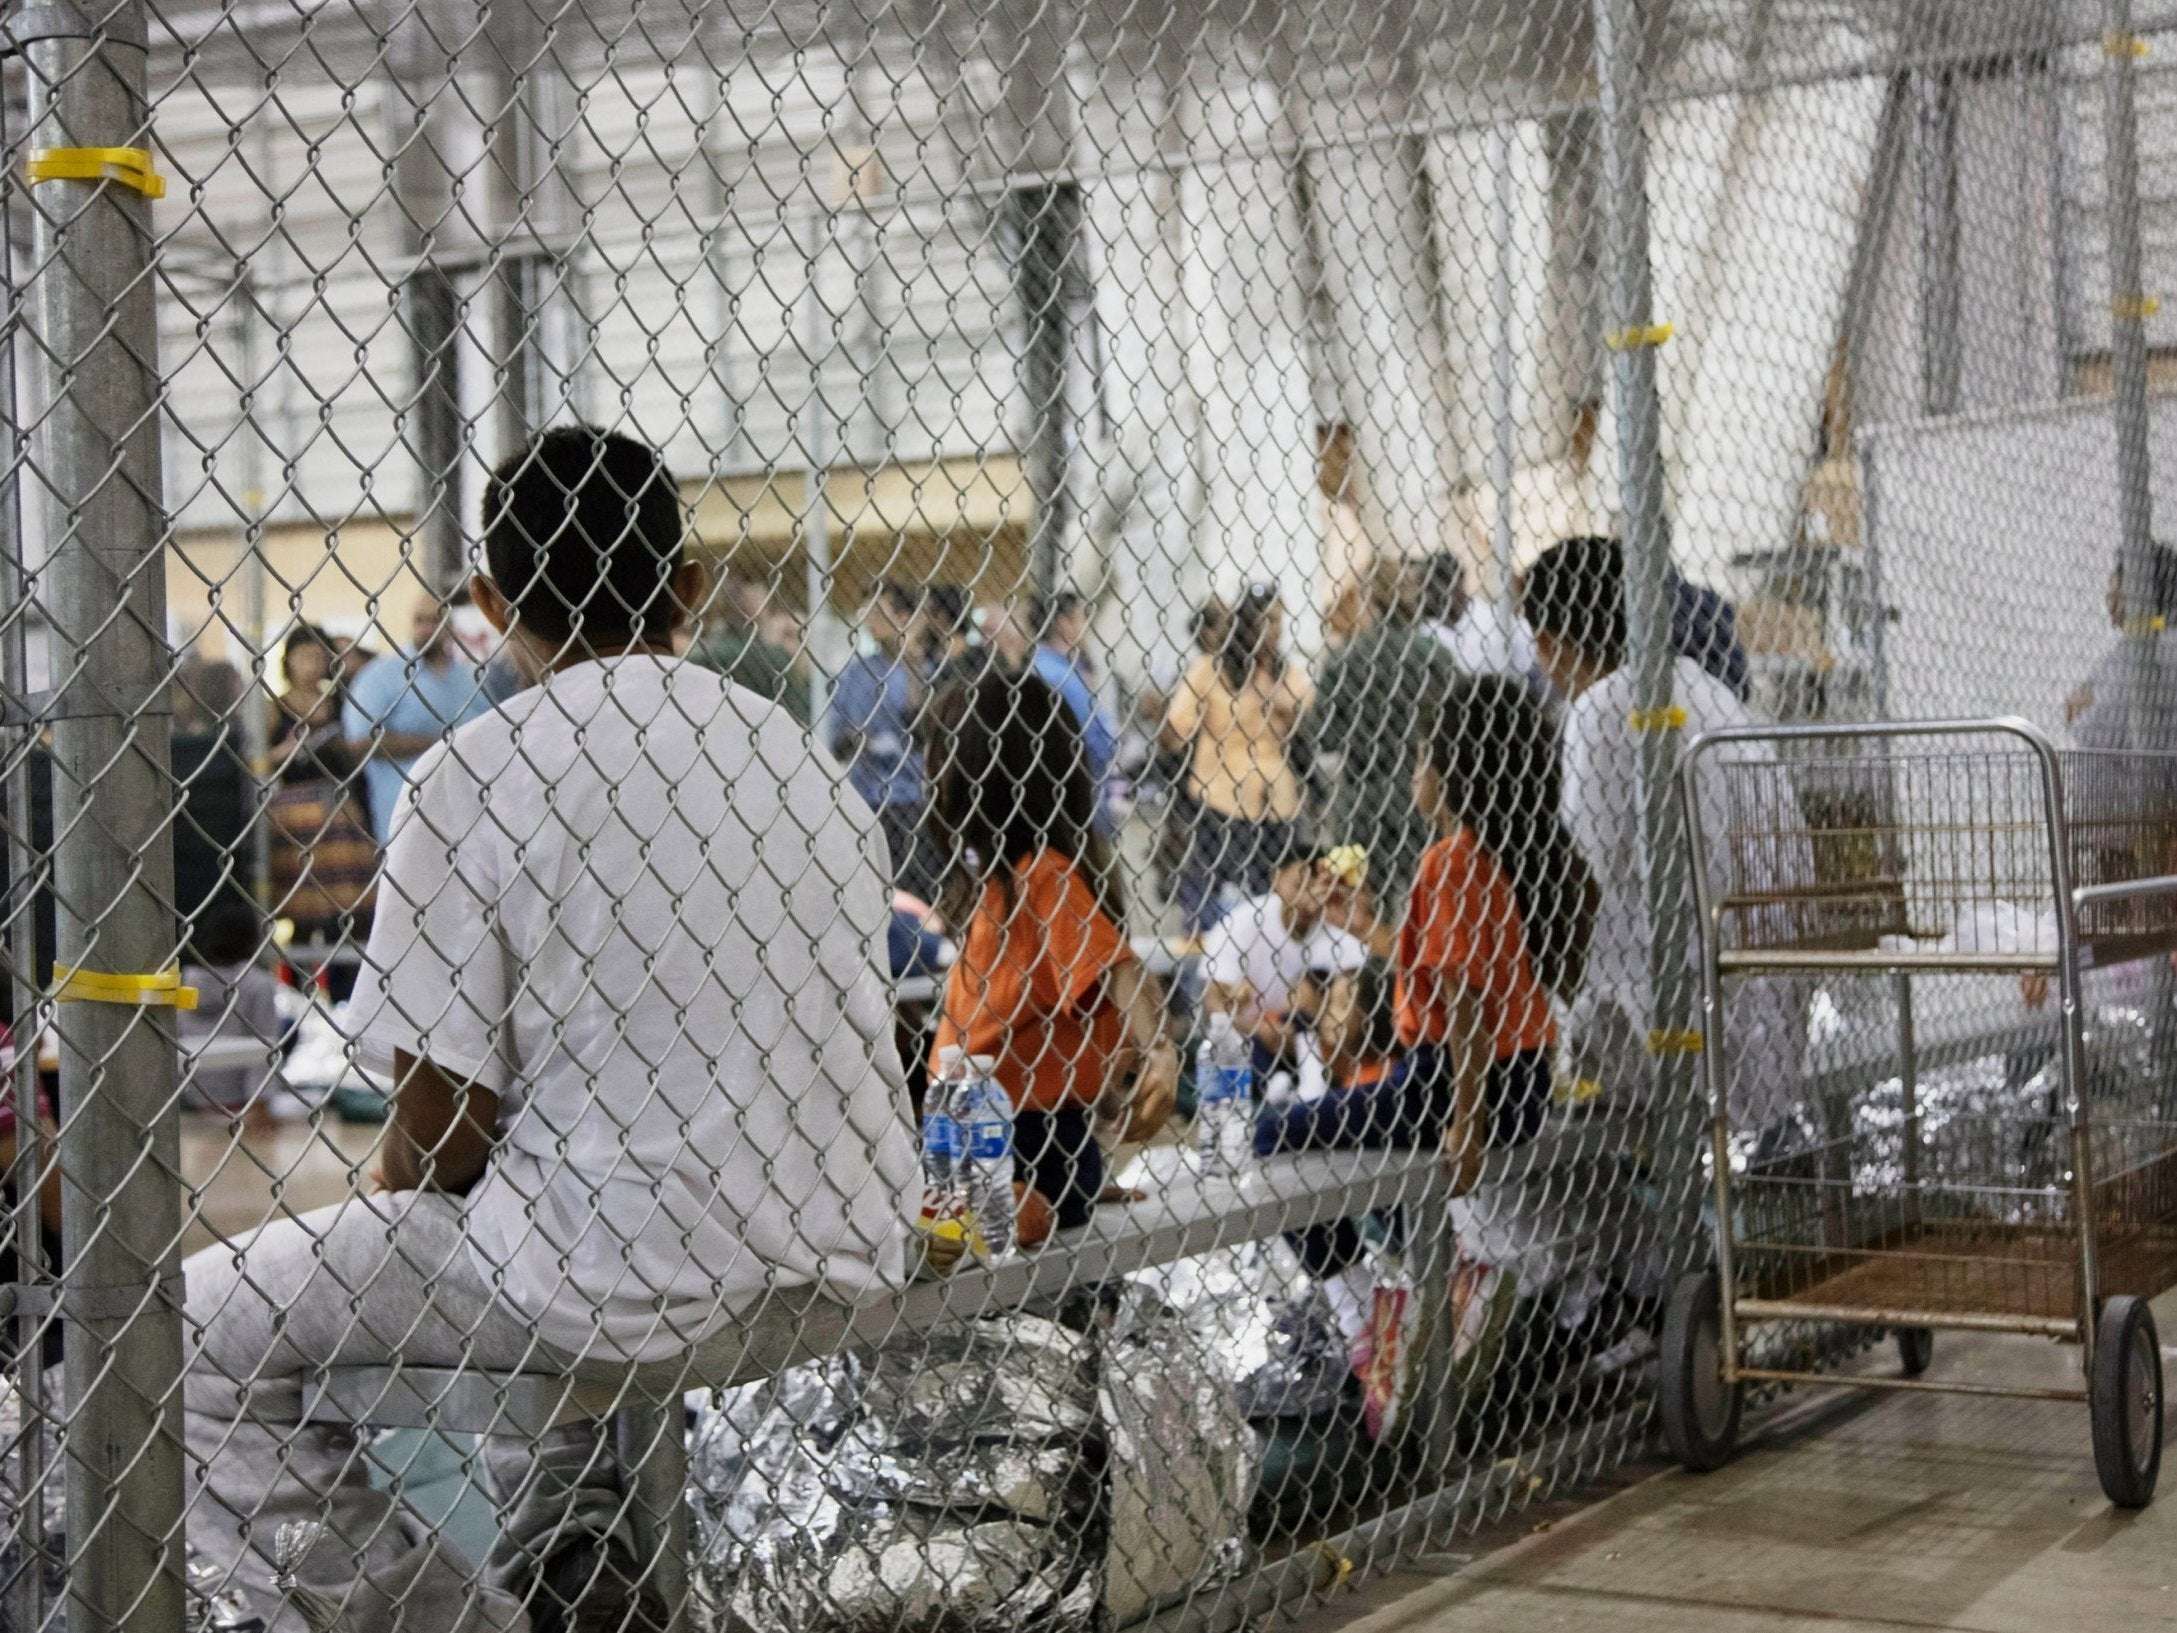 image for Trump's plan to cage kids indefinitely while denying them vaccines is ethnic cleansing in plain sight